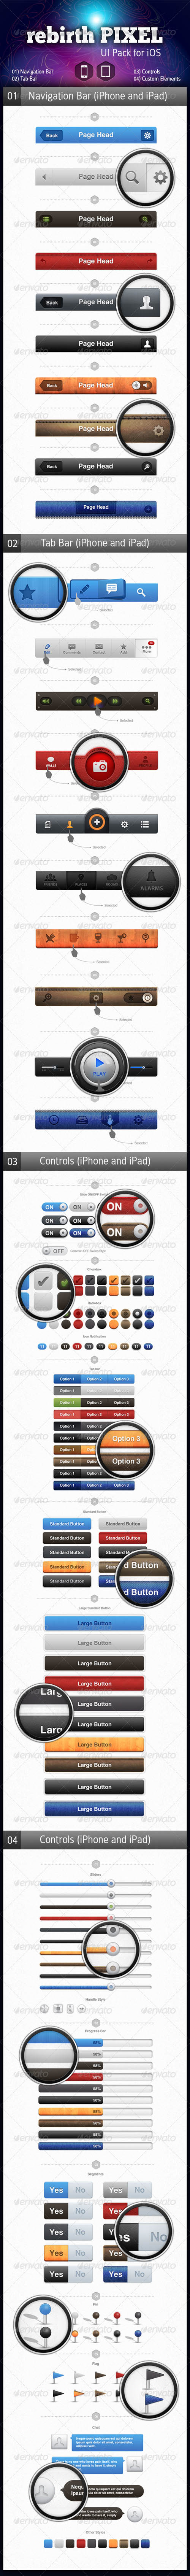 GraphicRiver - UI Pack for iOS by rebirthPIXEL 2577167